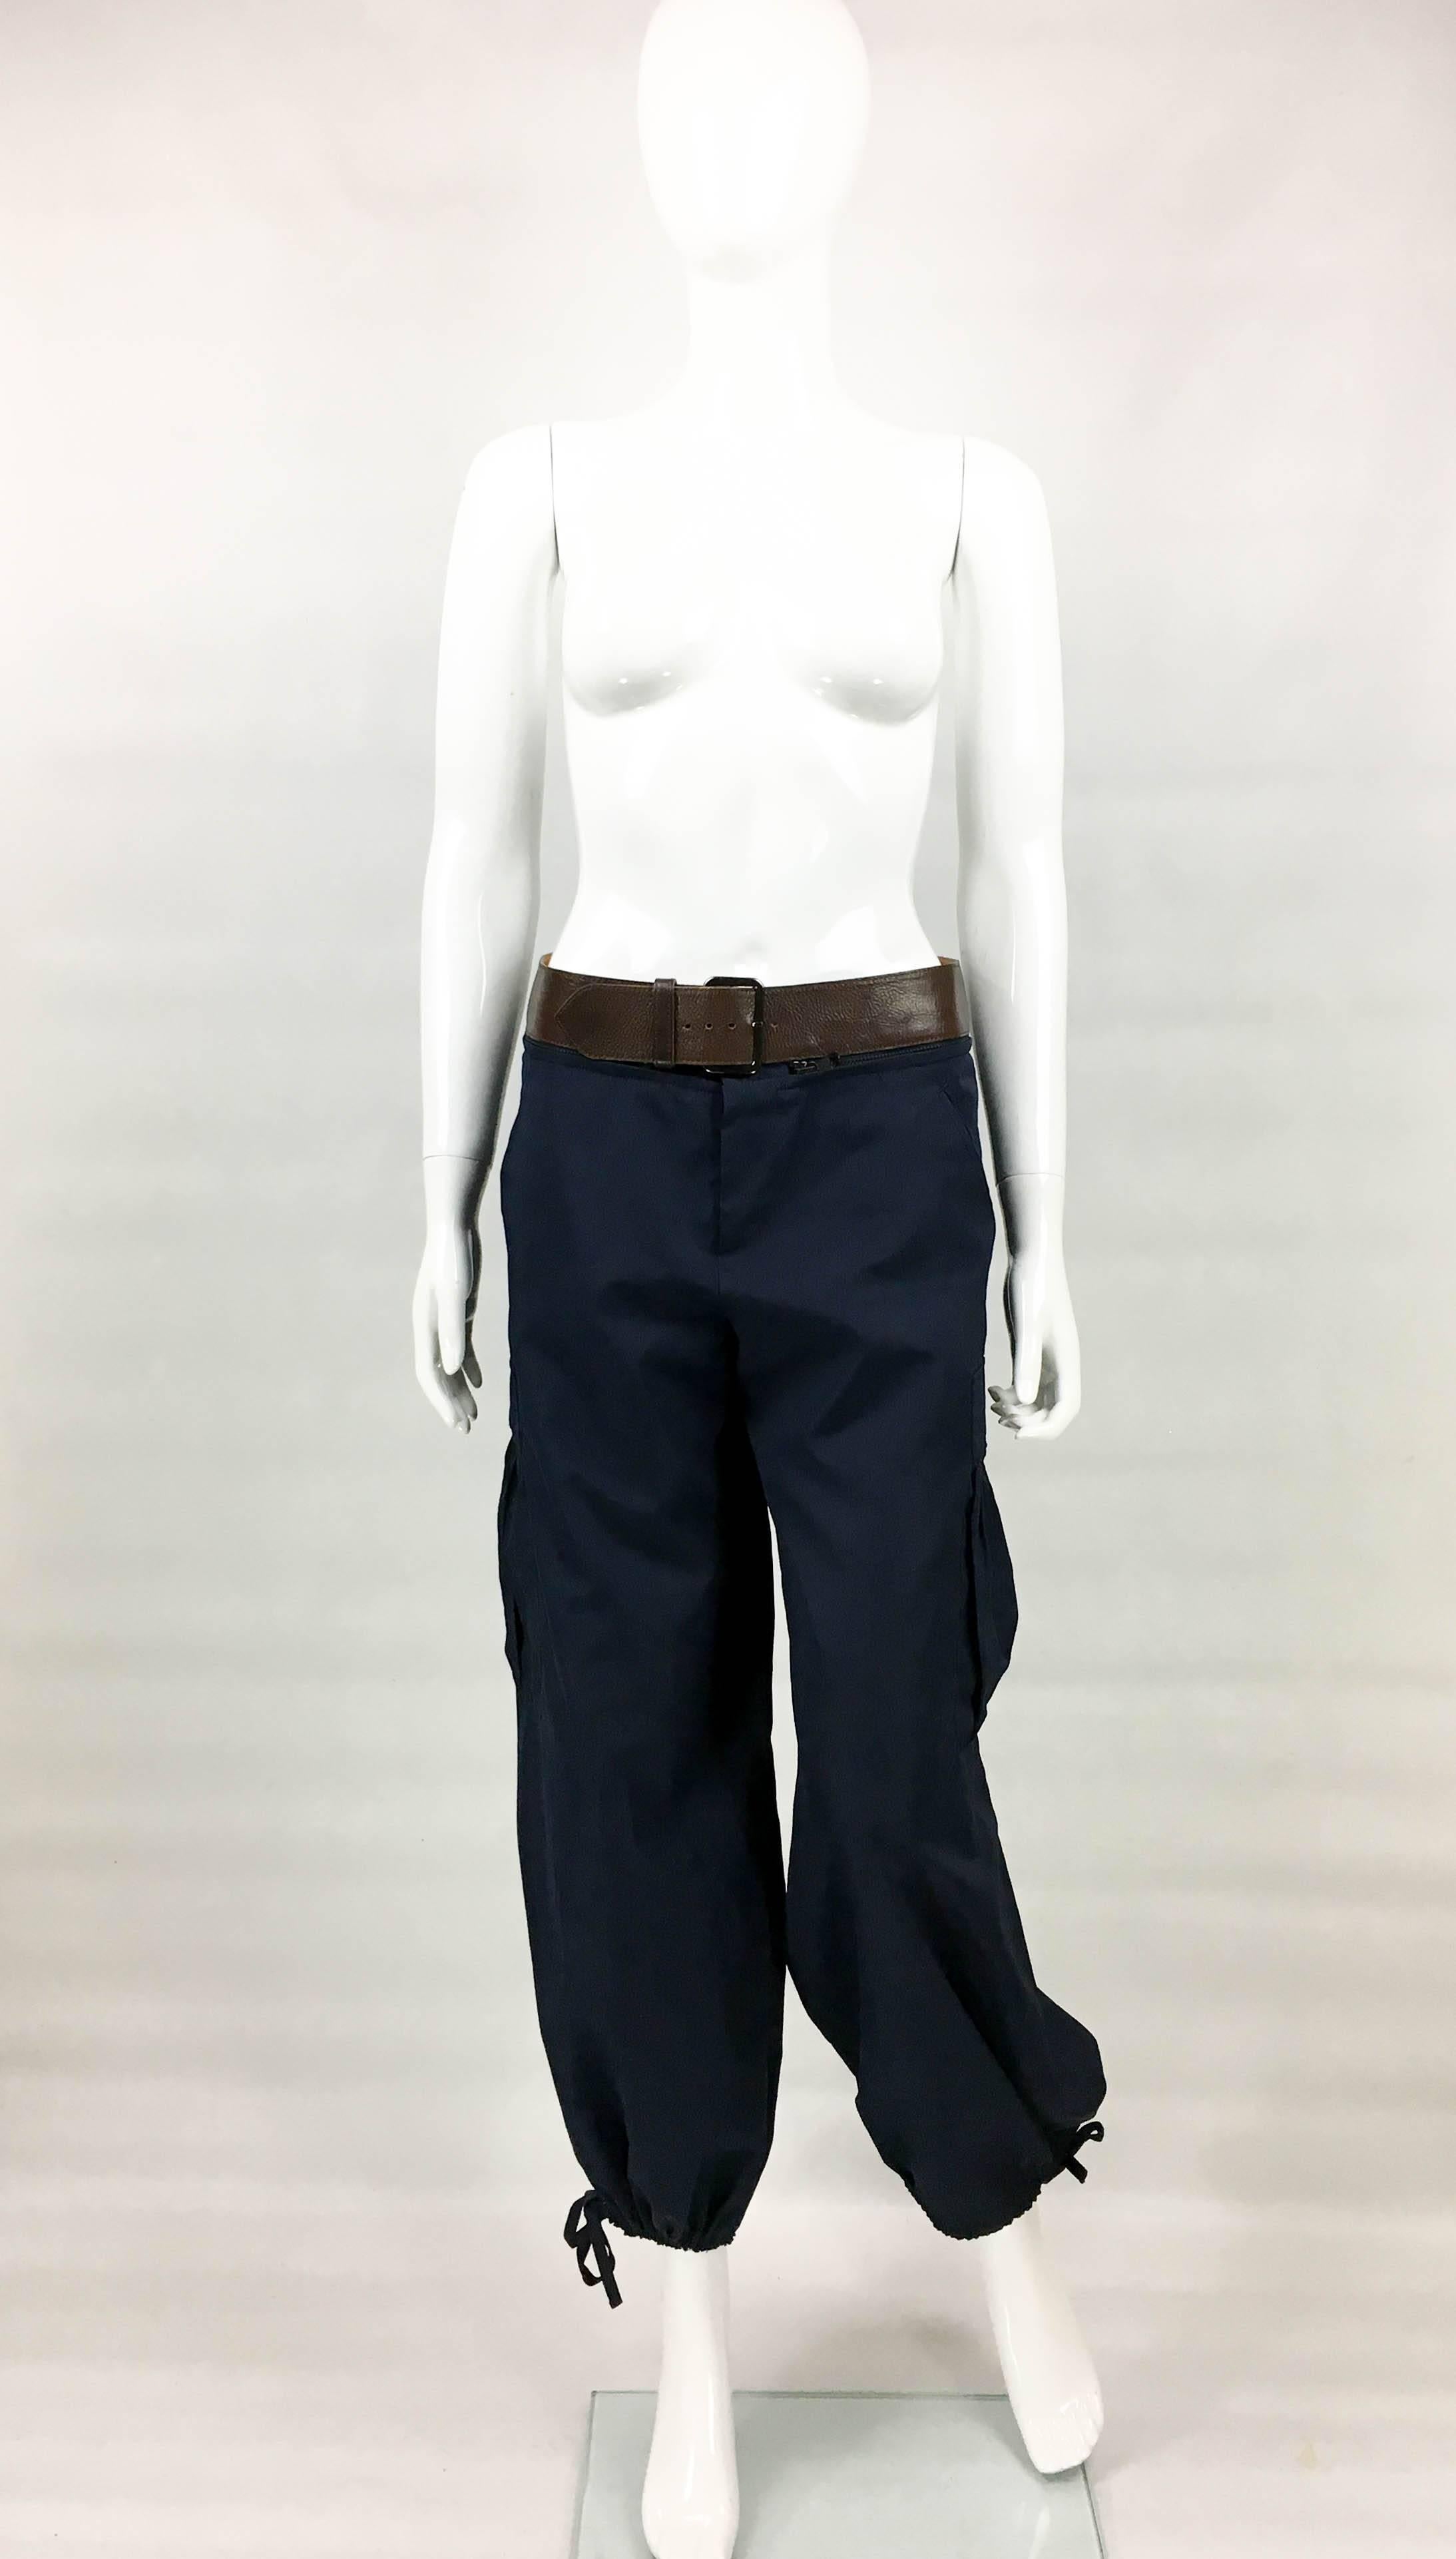 Vintage Jean Paul Gaultier Navy Blue Nylon Cargo Pants. This really cool piece by Jean Paul Gaultier dates back from the 1990’s. Made in navy blue nylon, the pants feature a detachable brown belt. With drawstrings to cuffs, they have sash pockets to